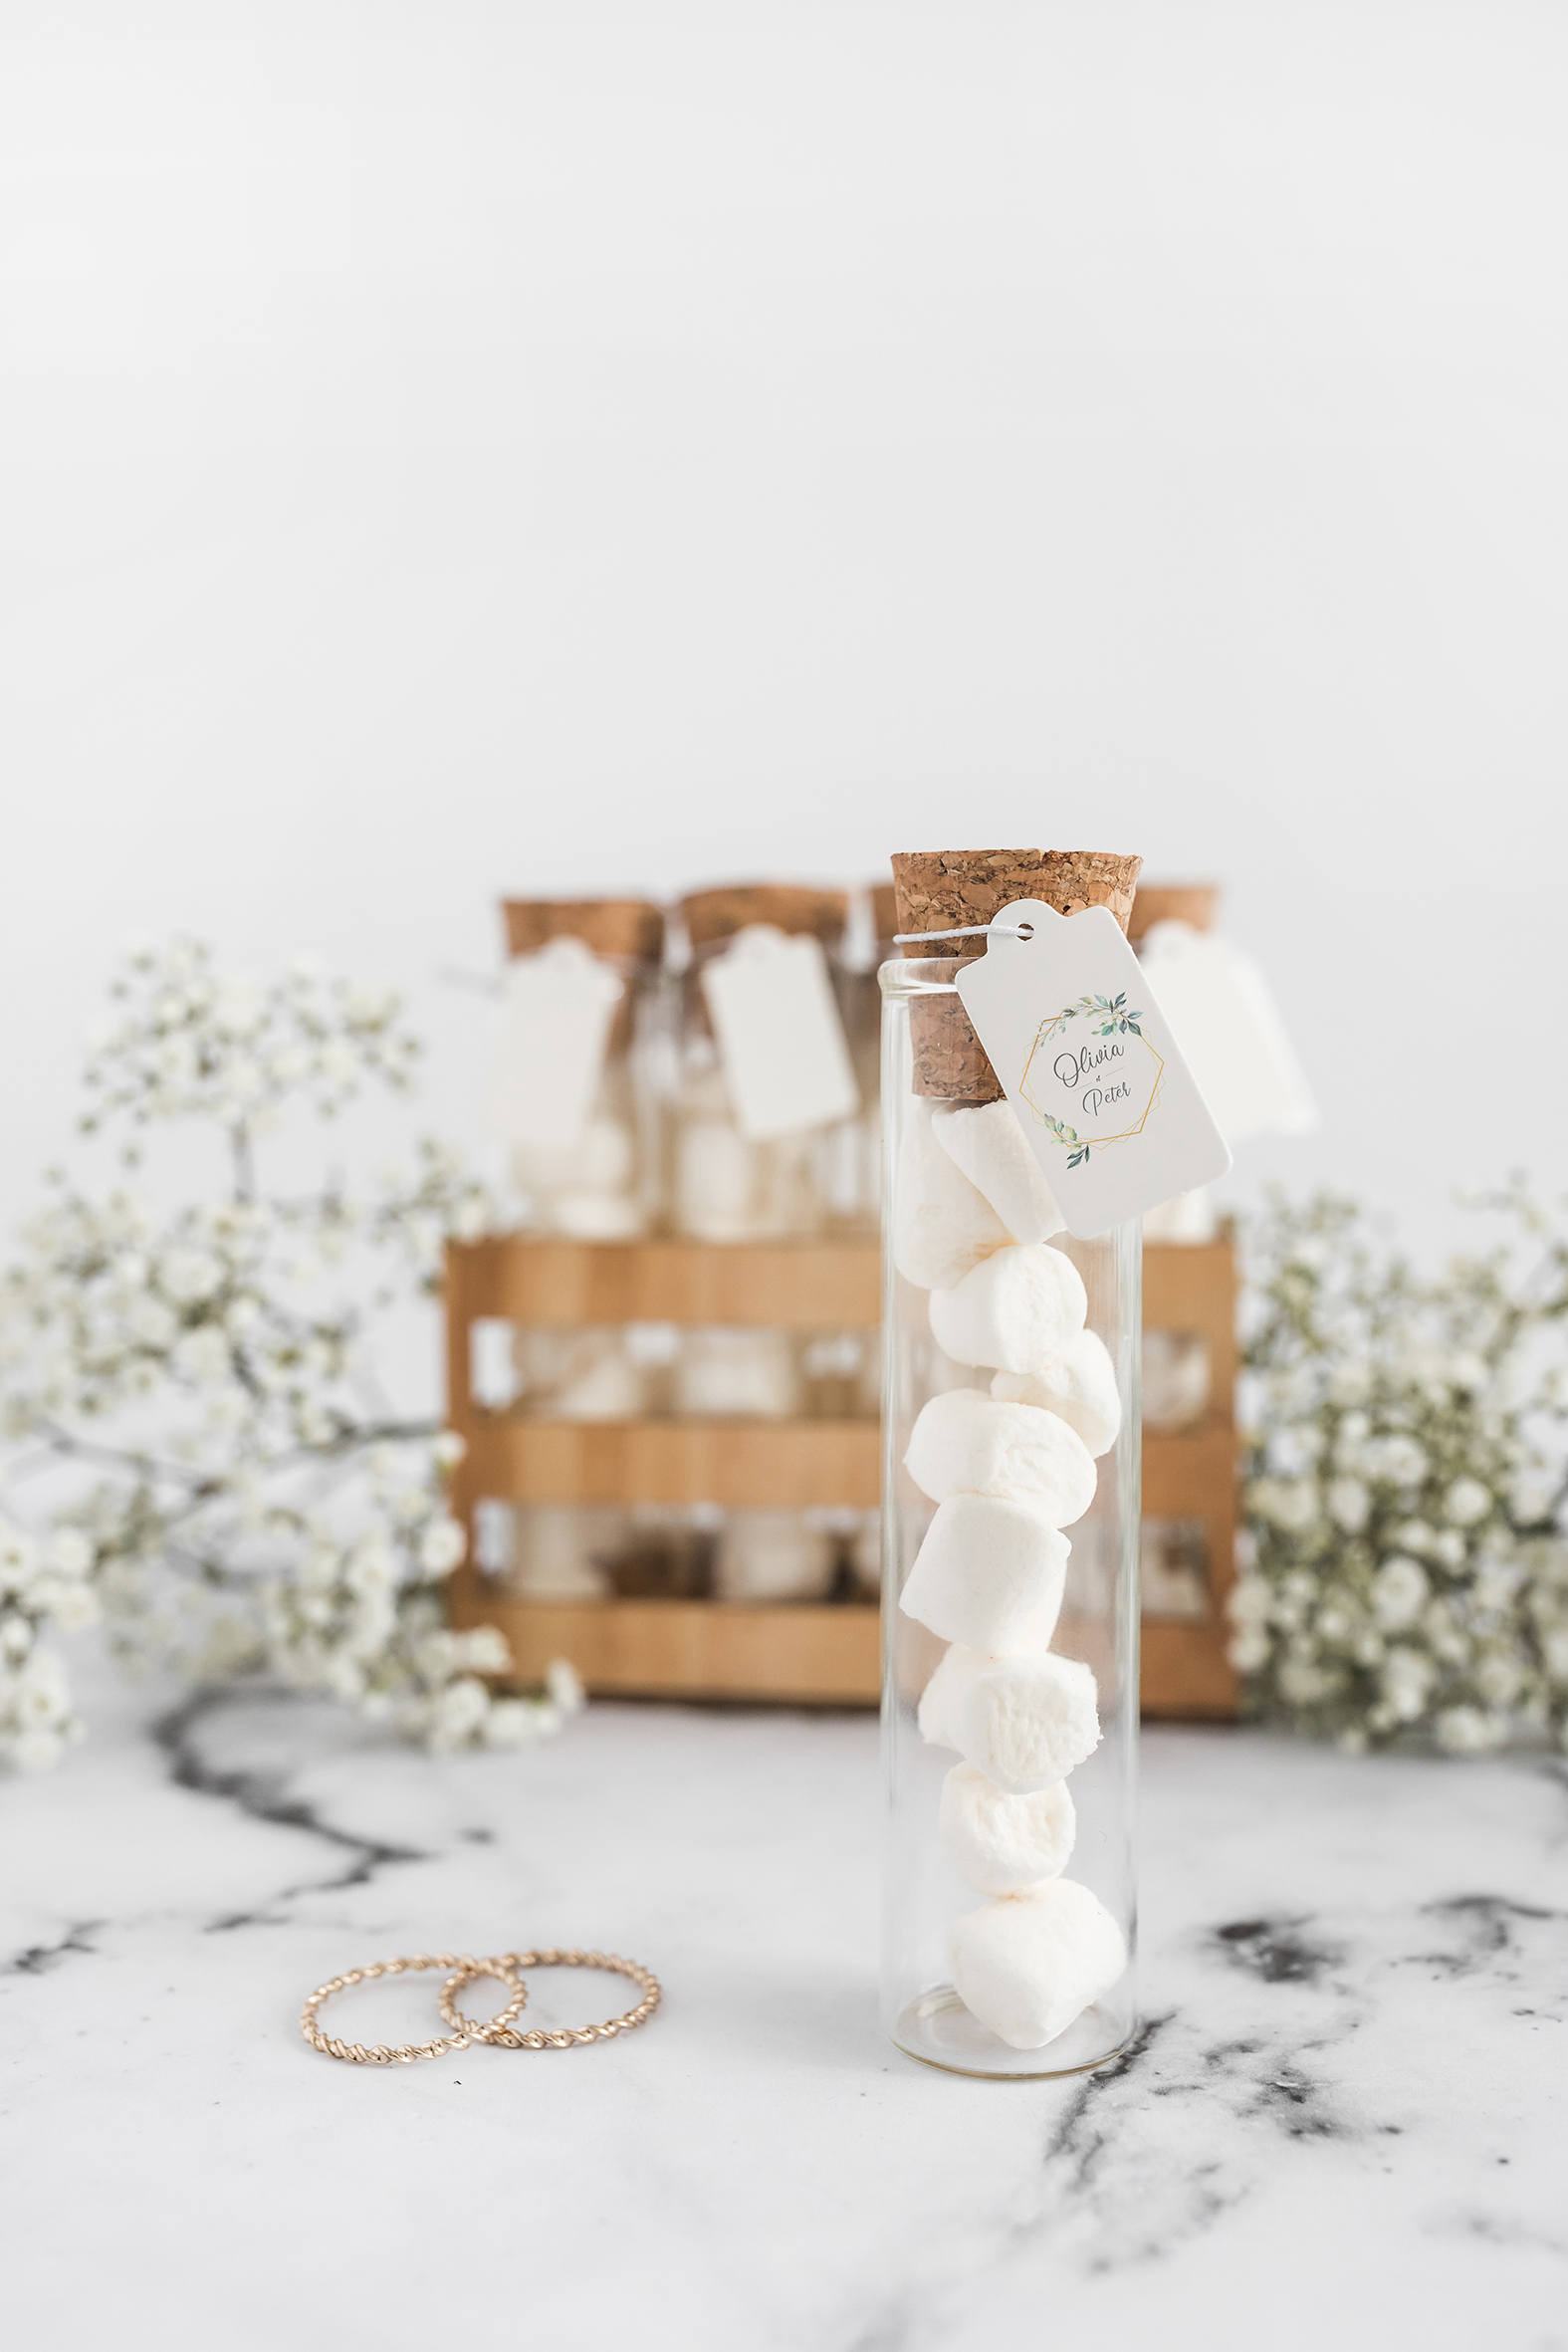 marshmallow-test-tube-with-blank-tag-wedding-rings-against-white-background